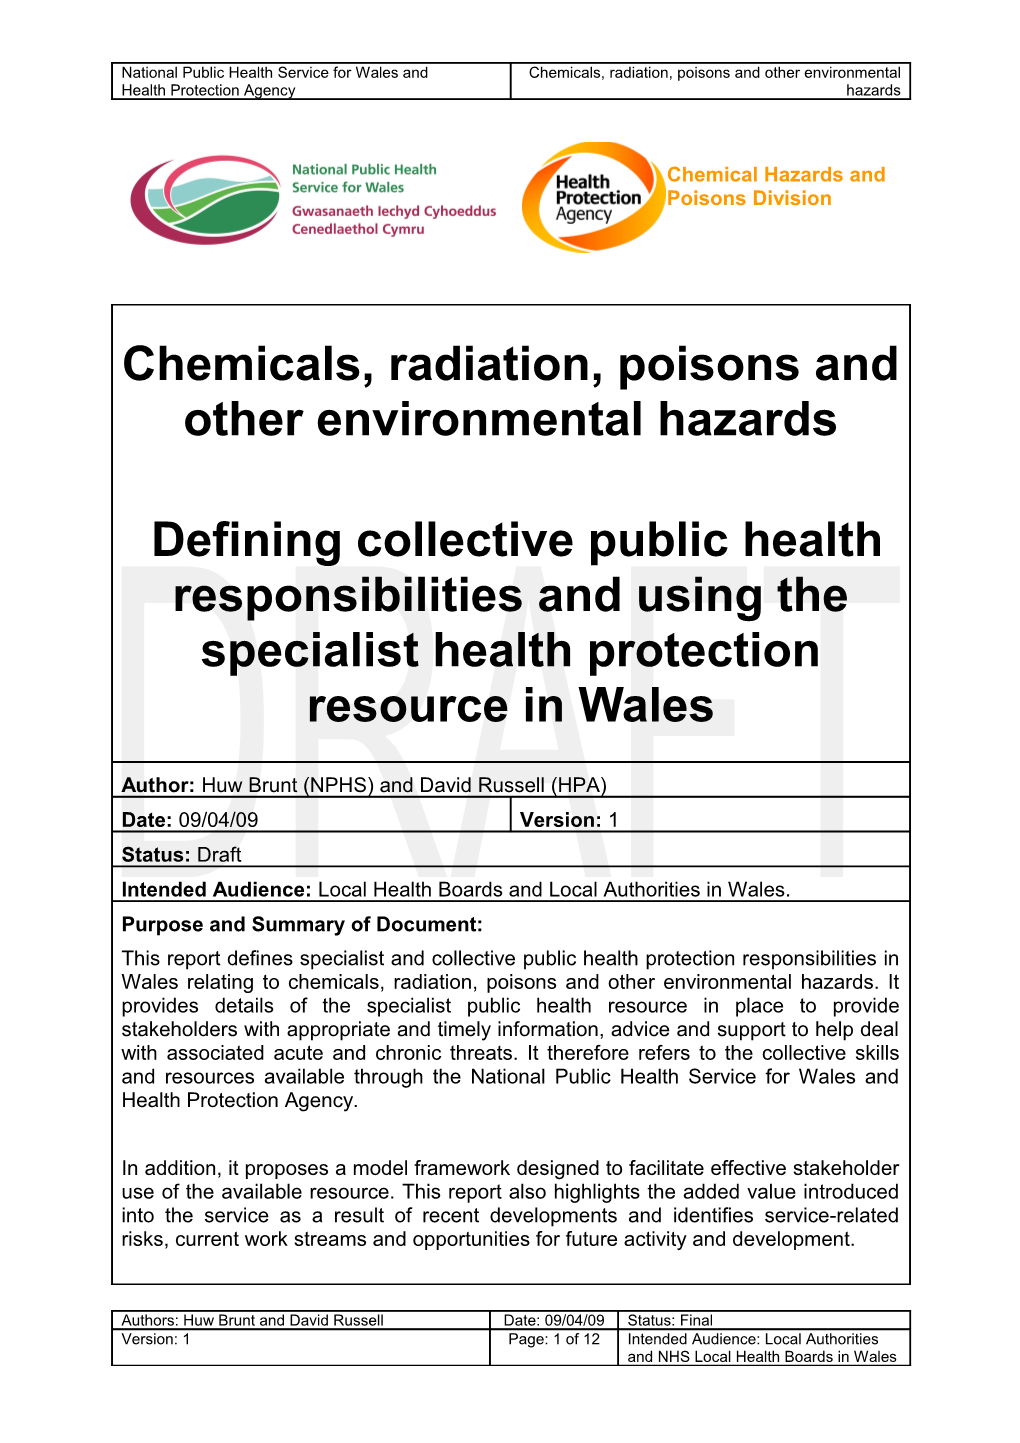 1.1 to Date, Specialist Public Health Protection Responsibilities Relating to Chemicals